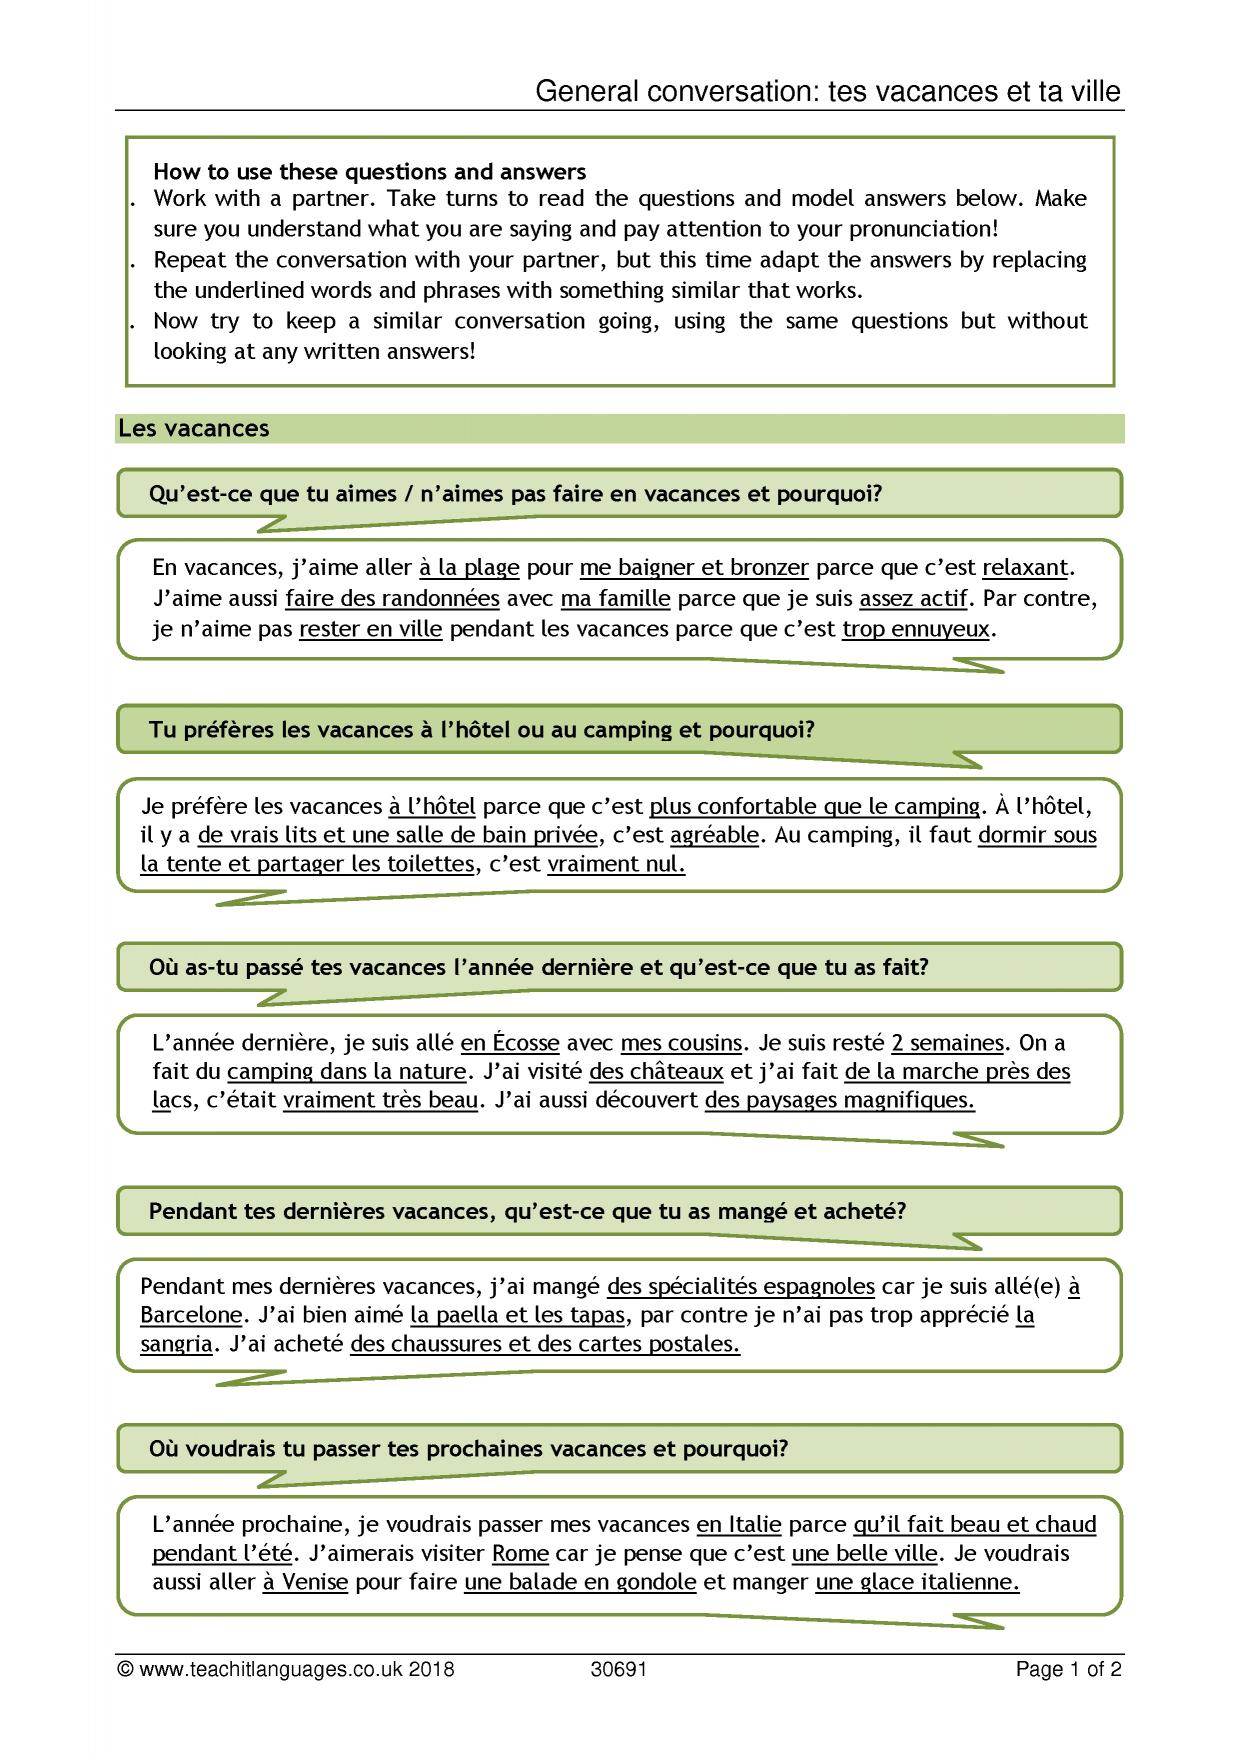 General conversation | Holidays and town | KS4 French teaching resource |  Teachit